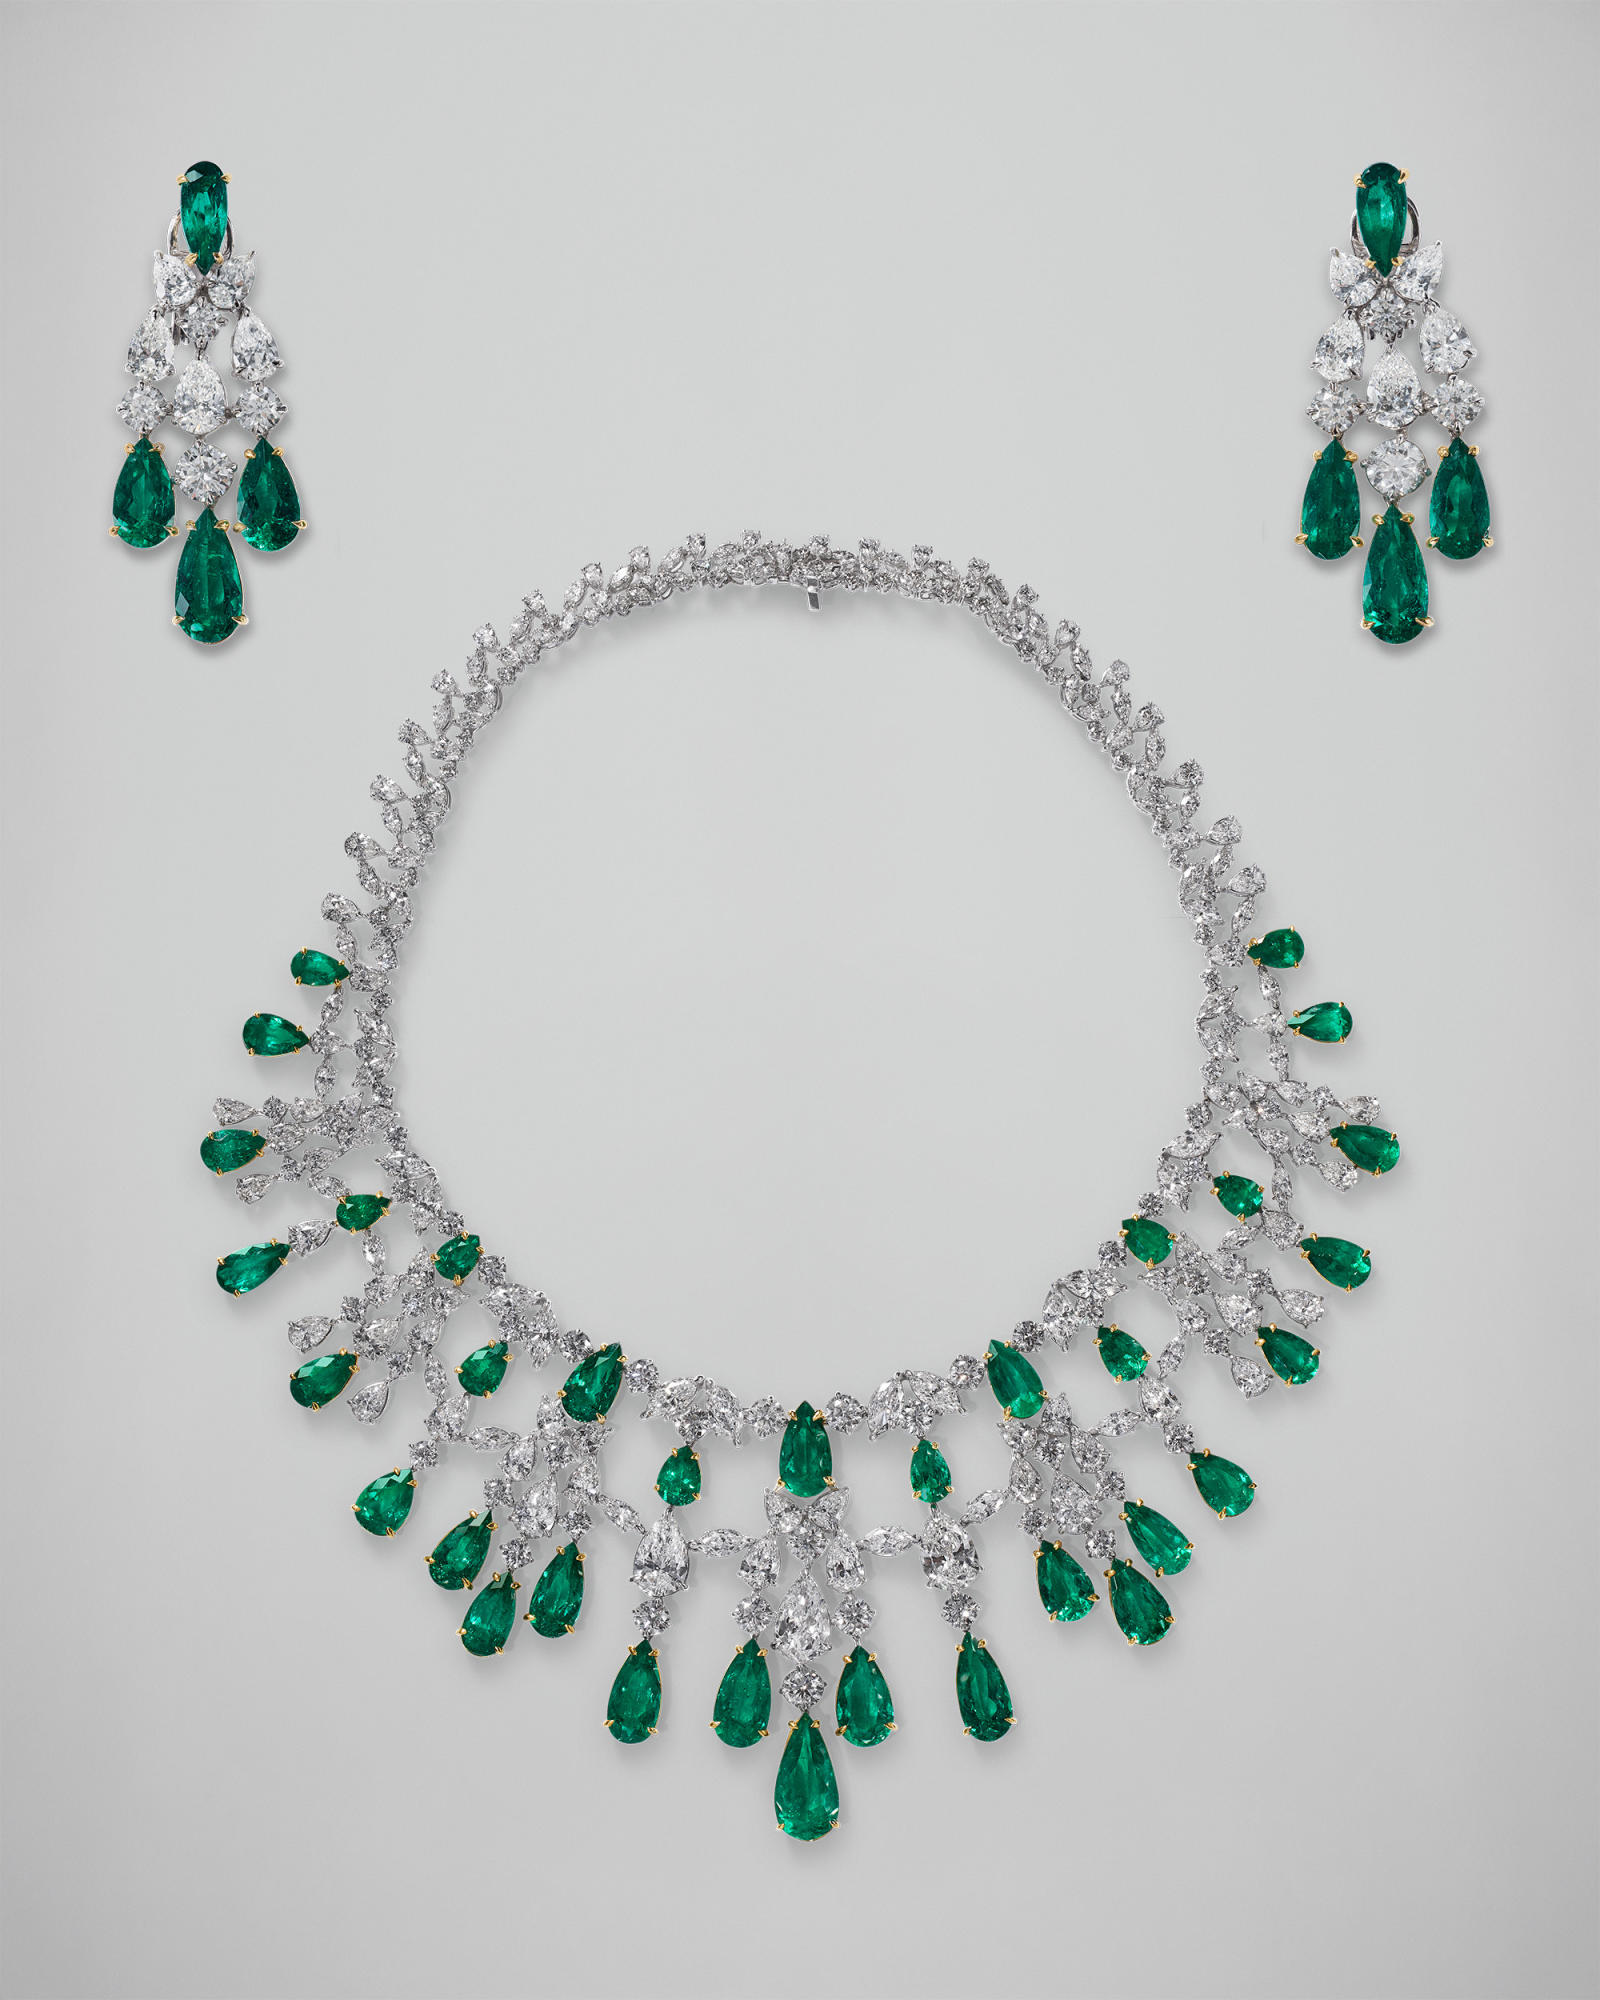 NECKLACE EARRINGS SET EMERALD V4 STACKED-optimized